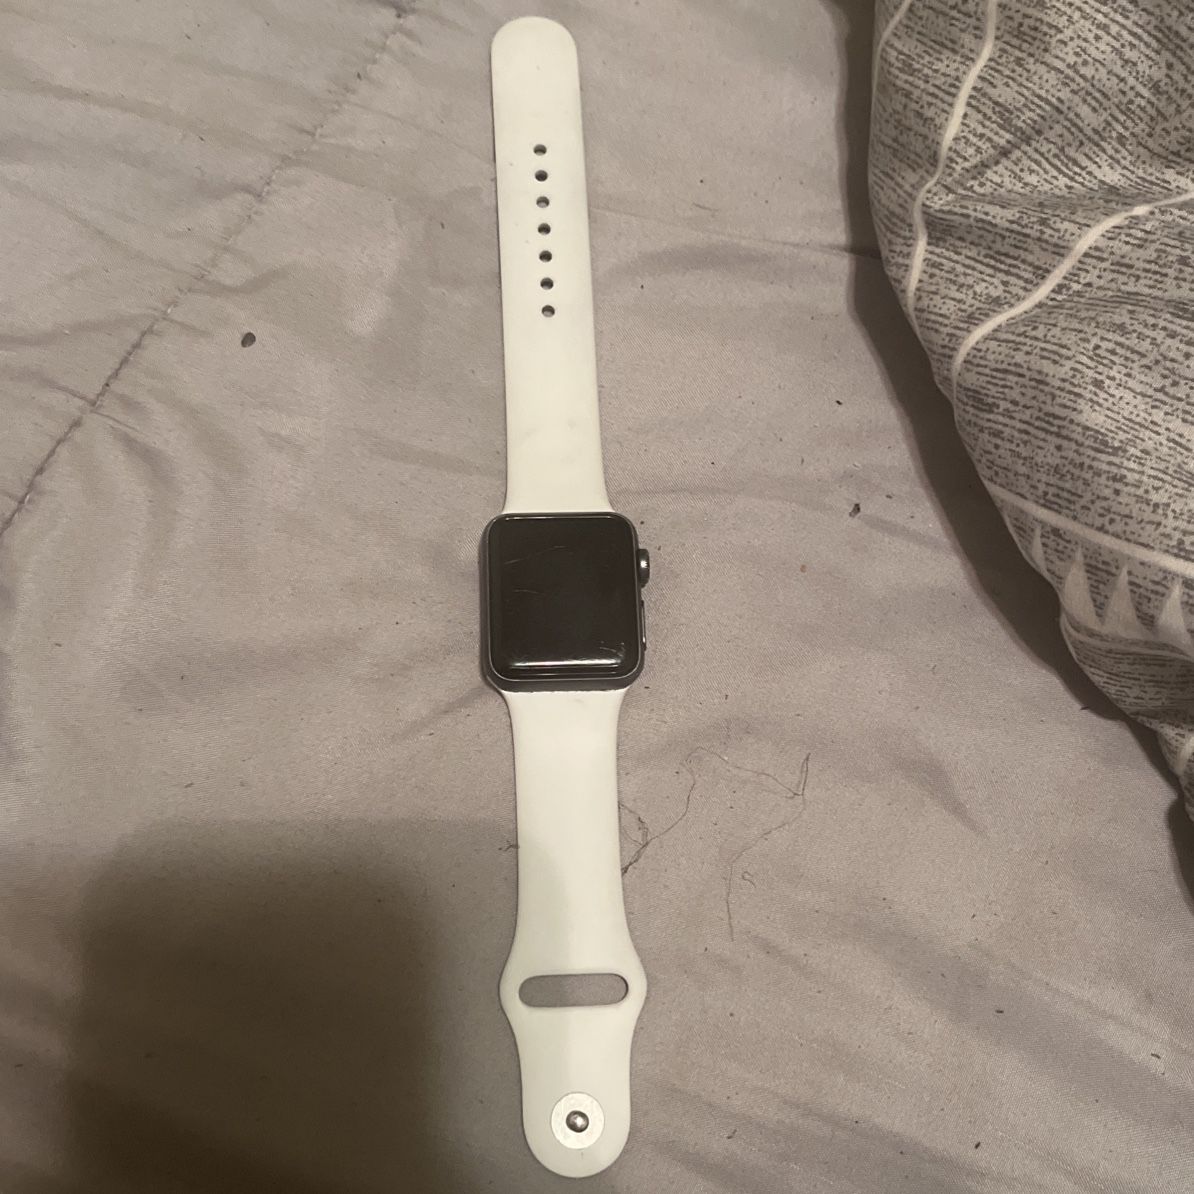 Series 3 Apple Watch With Charger